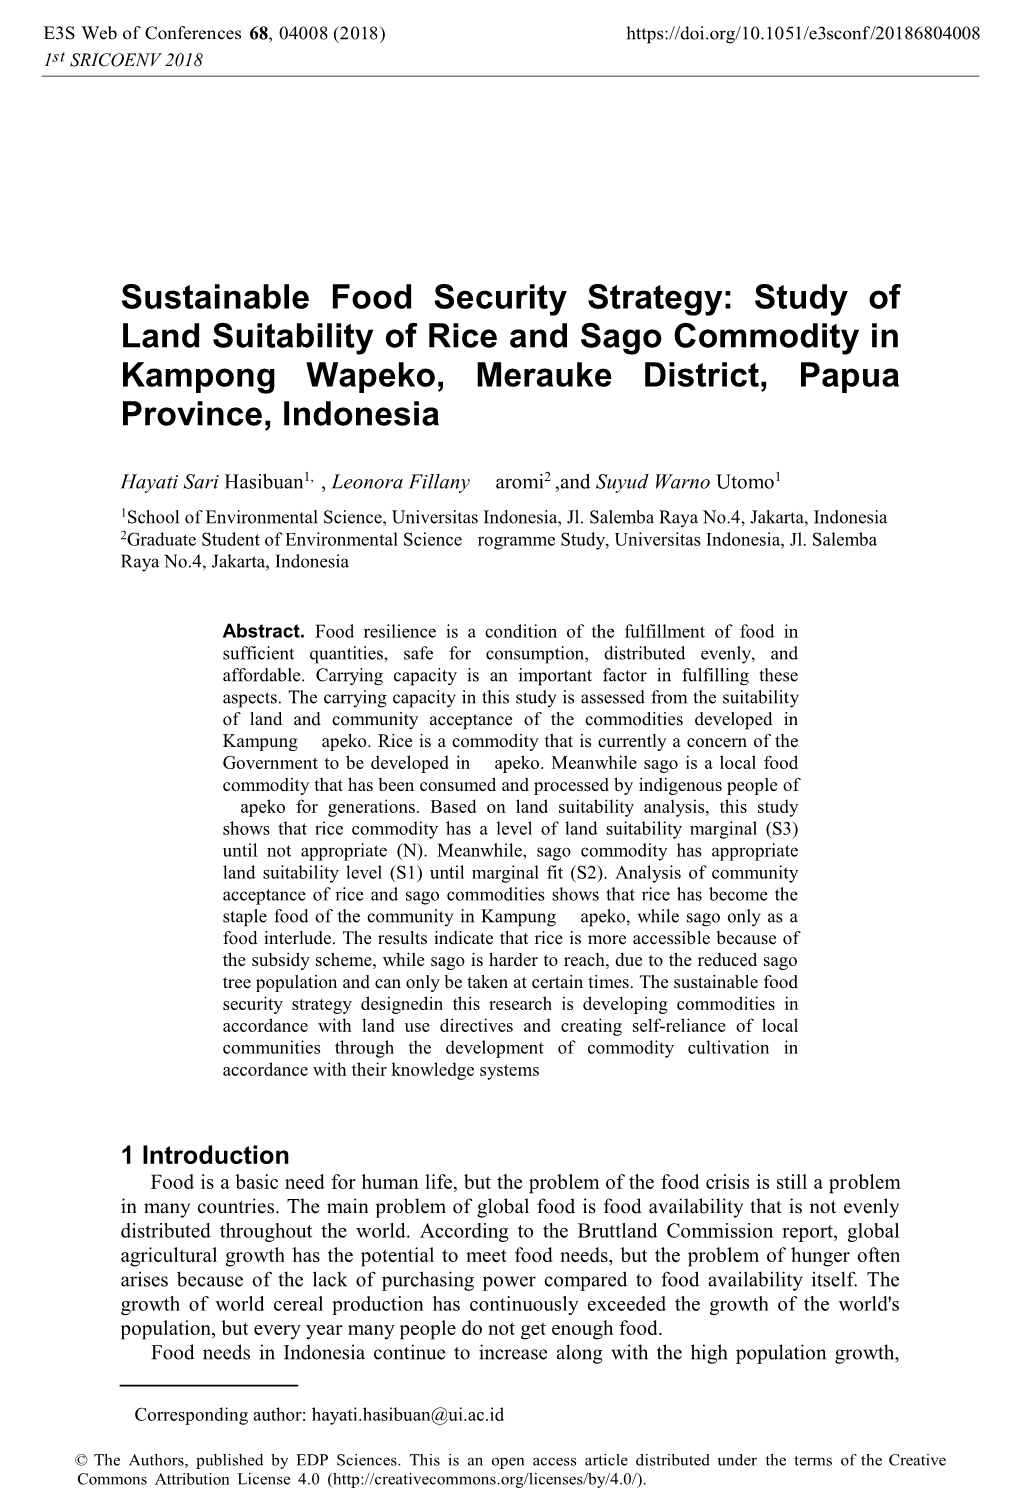 Study of Land Suitability of Rice and Sago Commodity in Kampong Wapeko, Merauke District, Papua Province, Indonesia